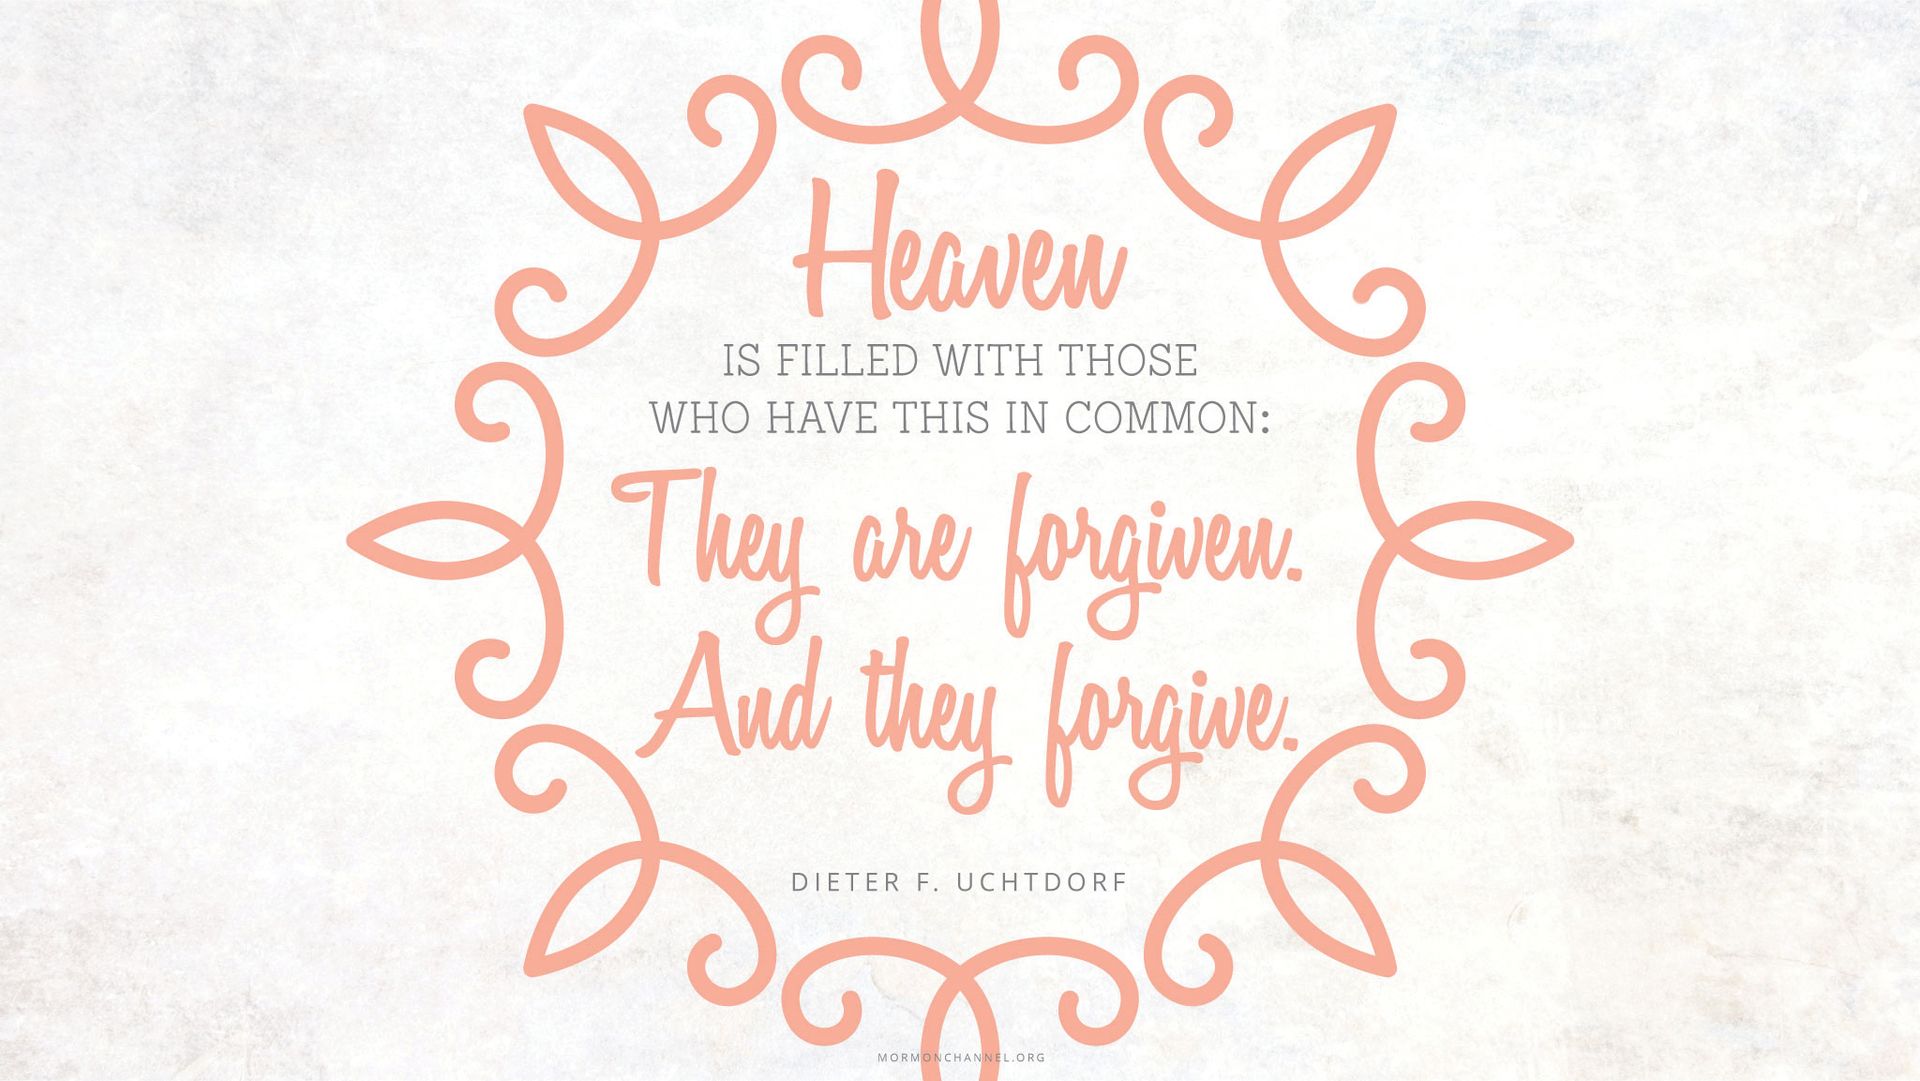 “Heaven is filled with those who have this in common: They are forgiven. And they forgive.”—President Dieter F. Uchtdorf, “The Merciful Obtain Mercy”